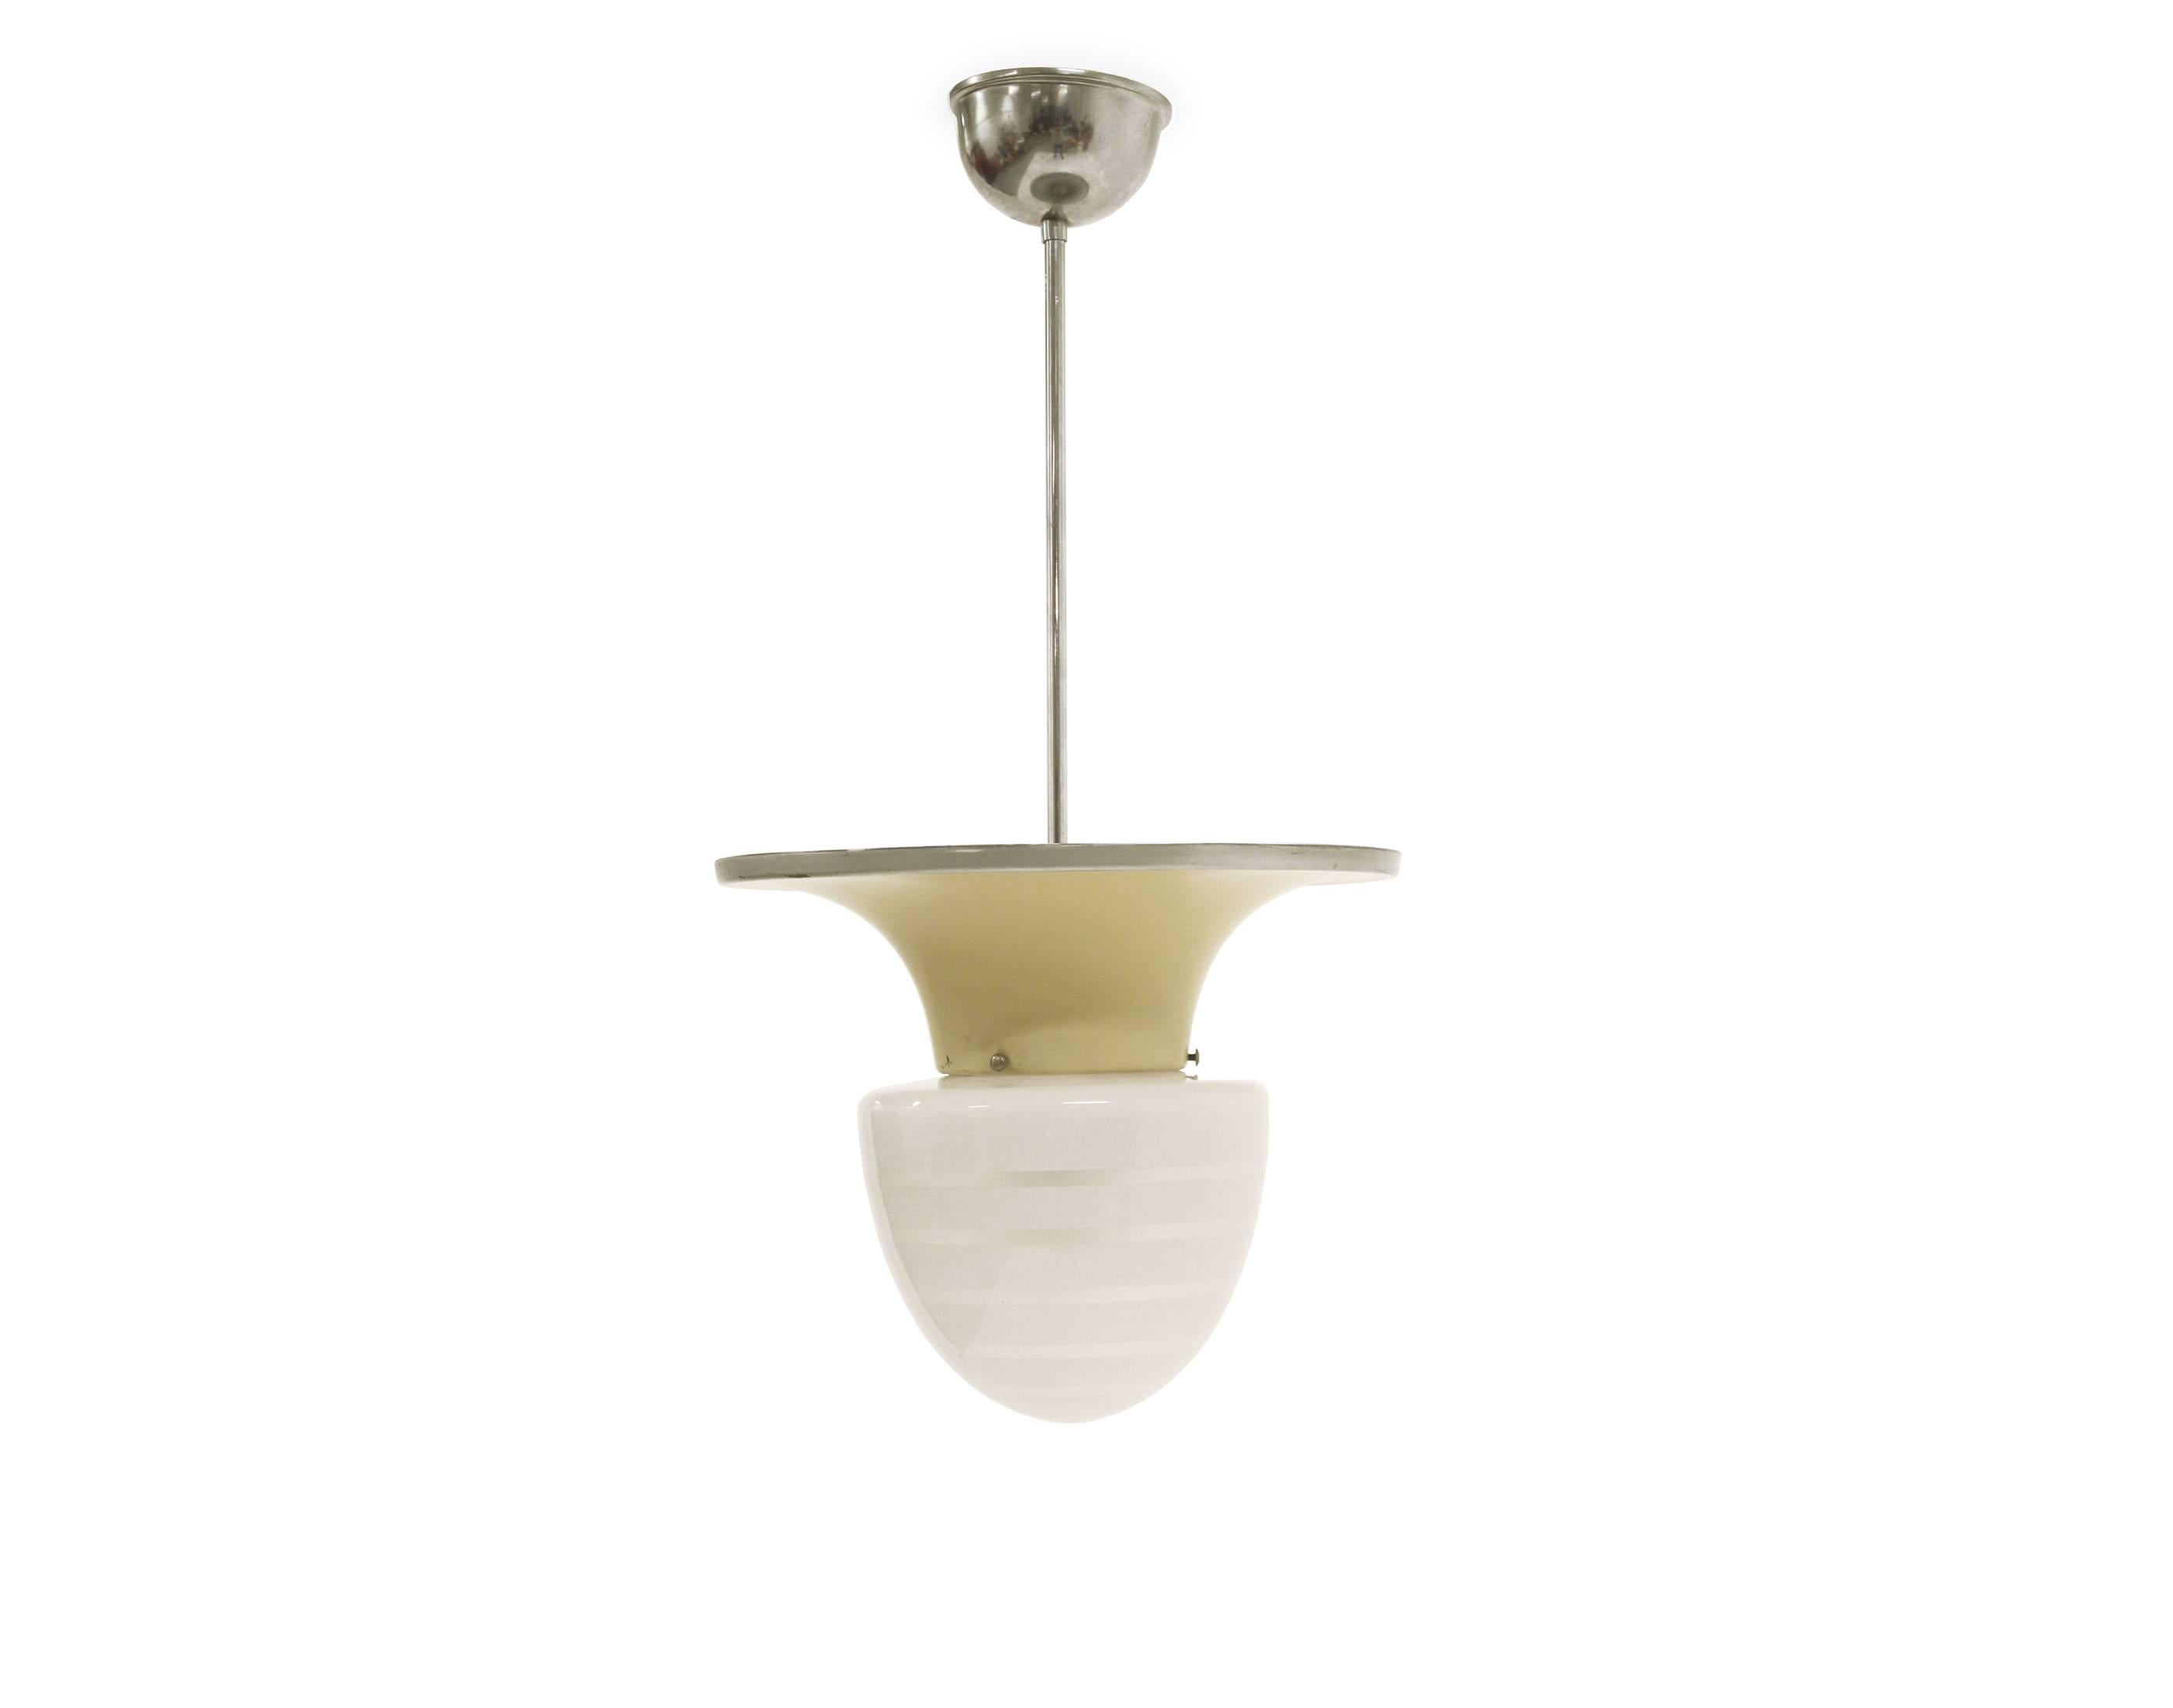 Sculptural ceiling lamp in steel with shade in opaline glass. Designed and made in Sweden by Bohlmarks, circa second half of 1930. The lamp is fully working and in good vintage condition with normal age related wear.